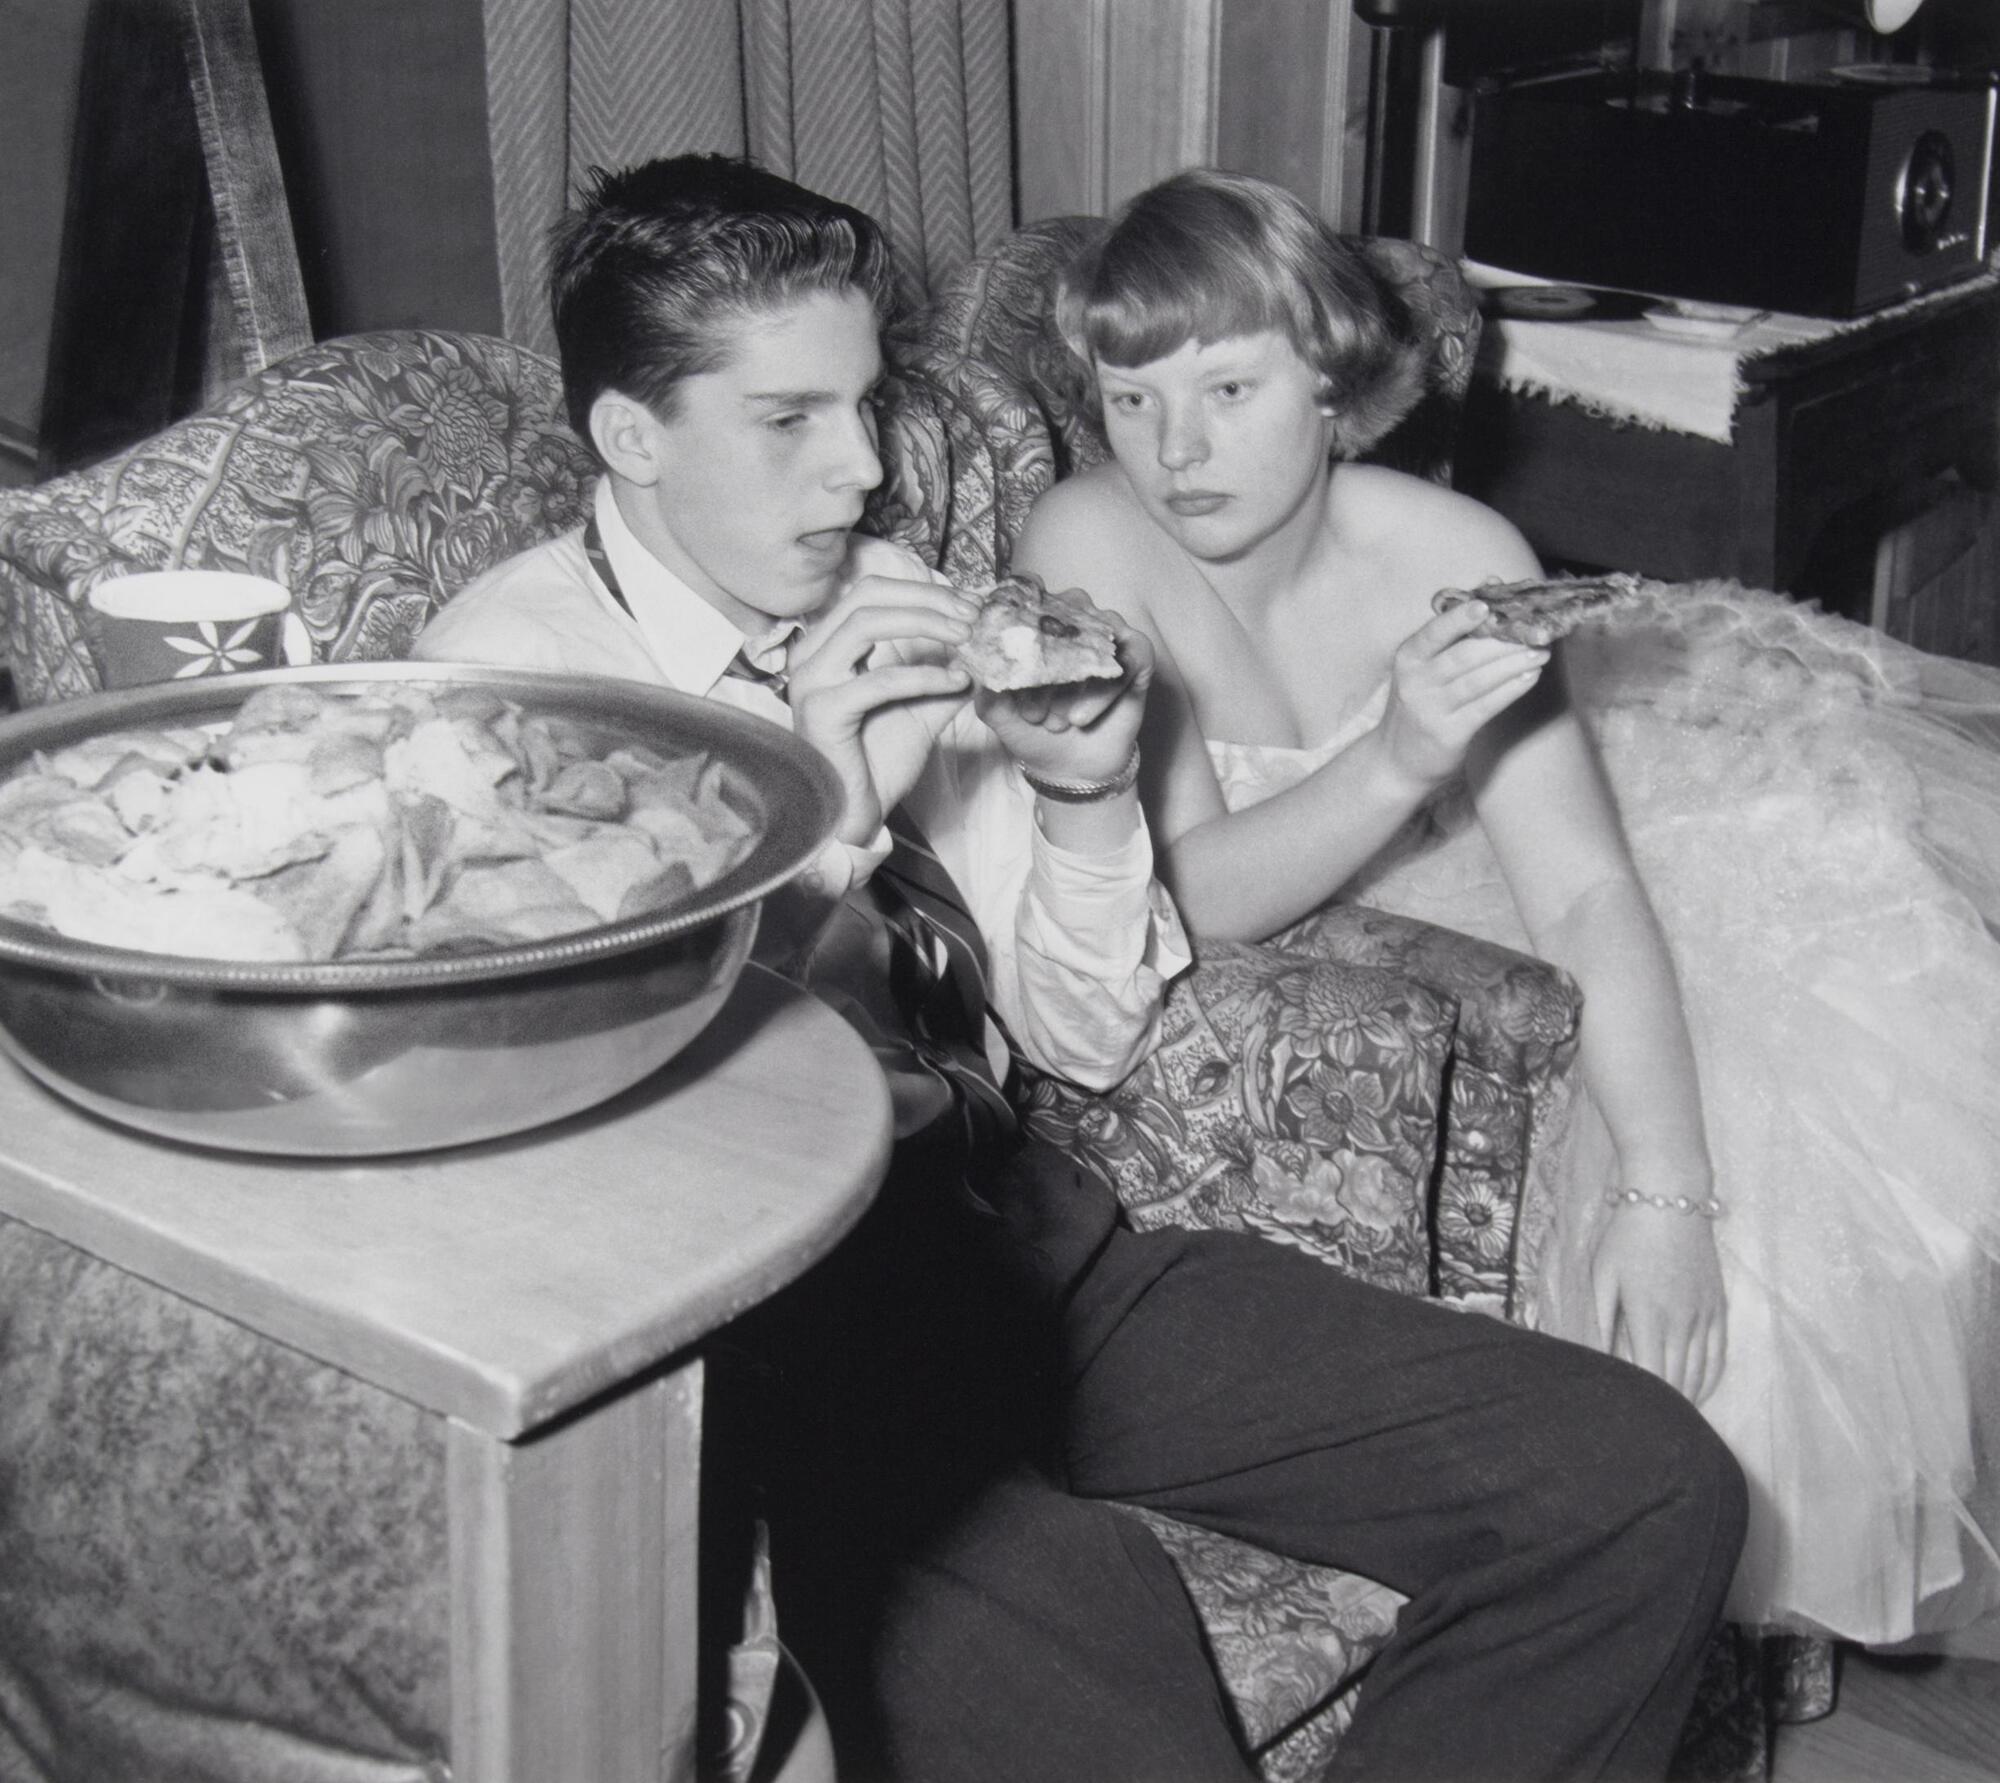 A boy and girl seated on two upholstered chairs eating pizza. The girl is wearing a fancy dress and the boy is in a shirt and tie. There is a large bowl of potato chips on the table.